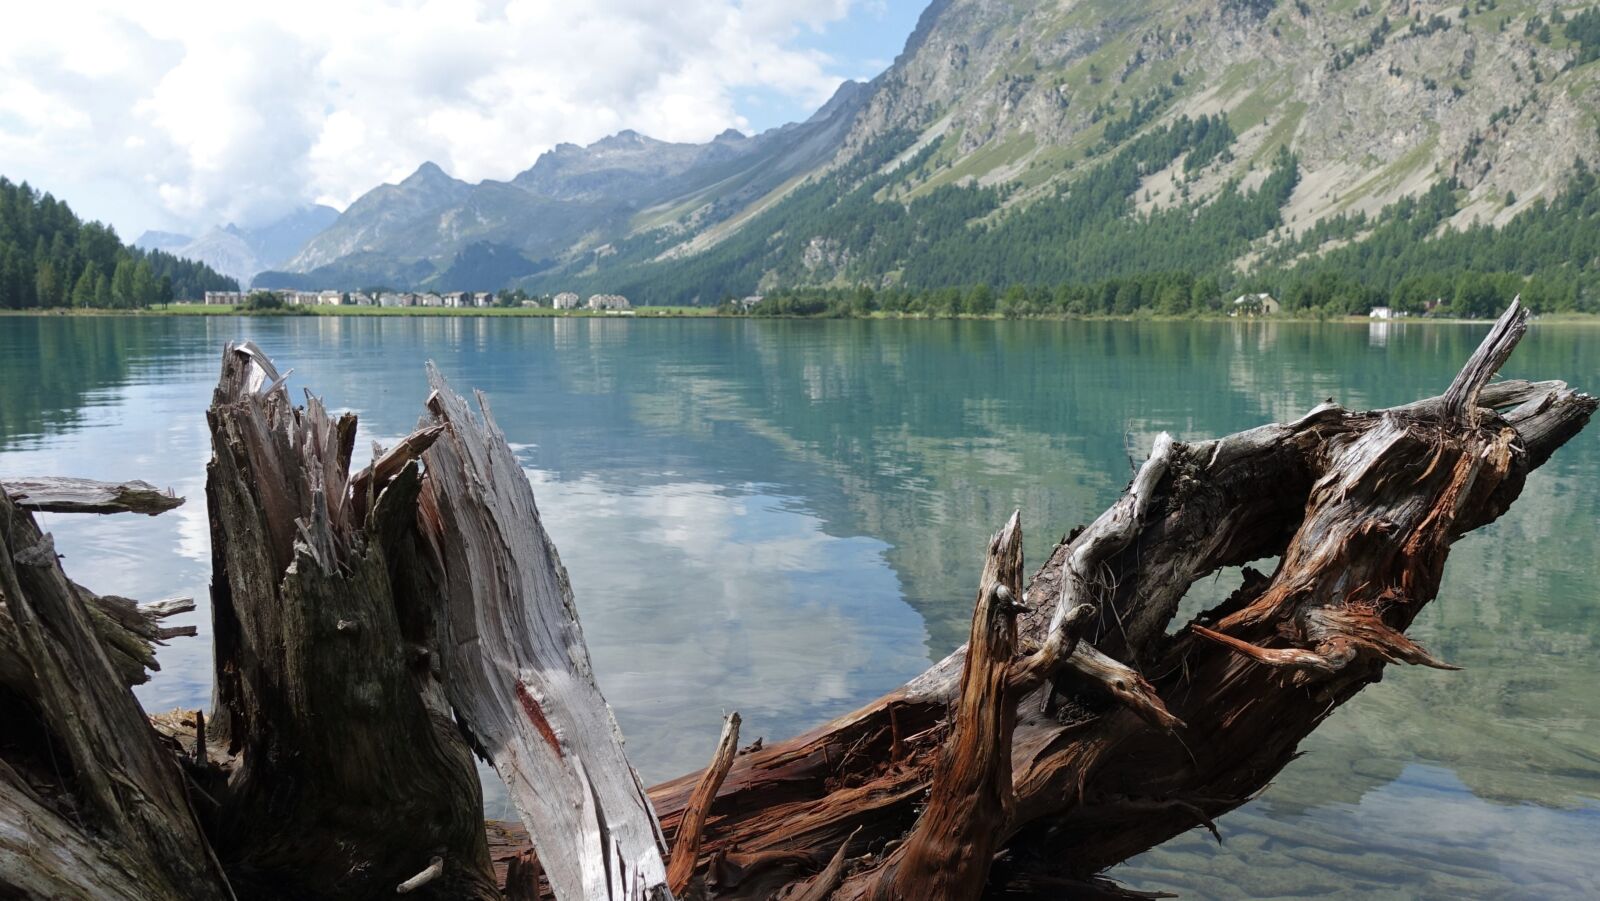 Sony Cyber-shot DSC-RX100 IV sample photo. Bergsee, engadin, water photography